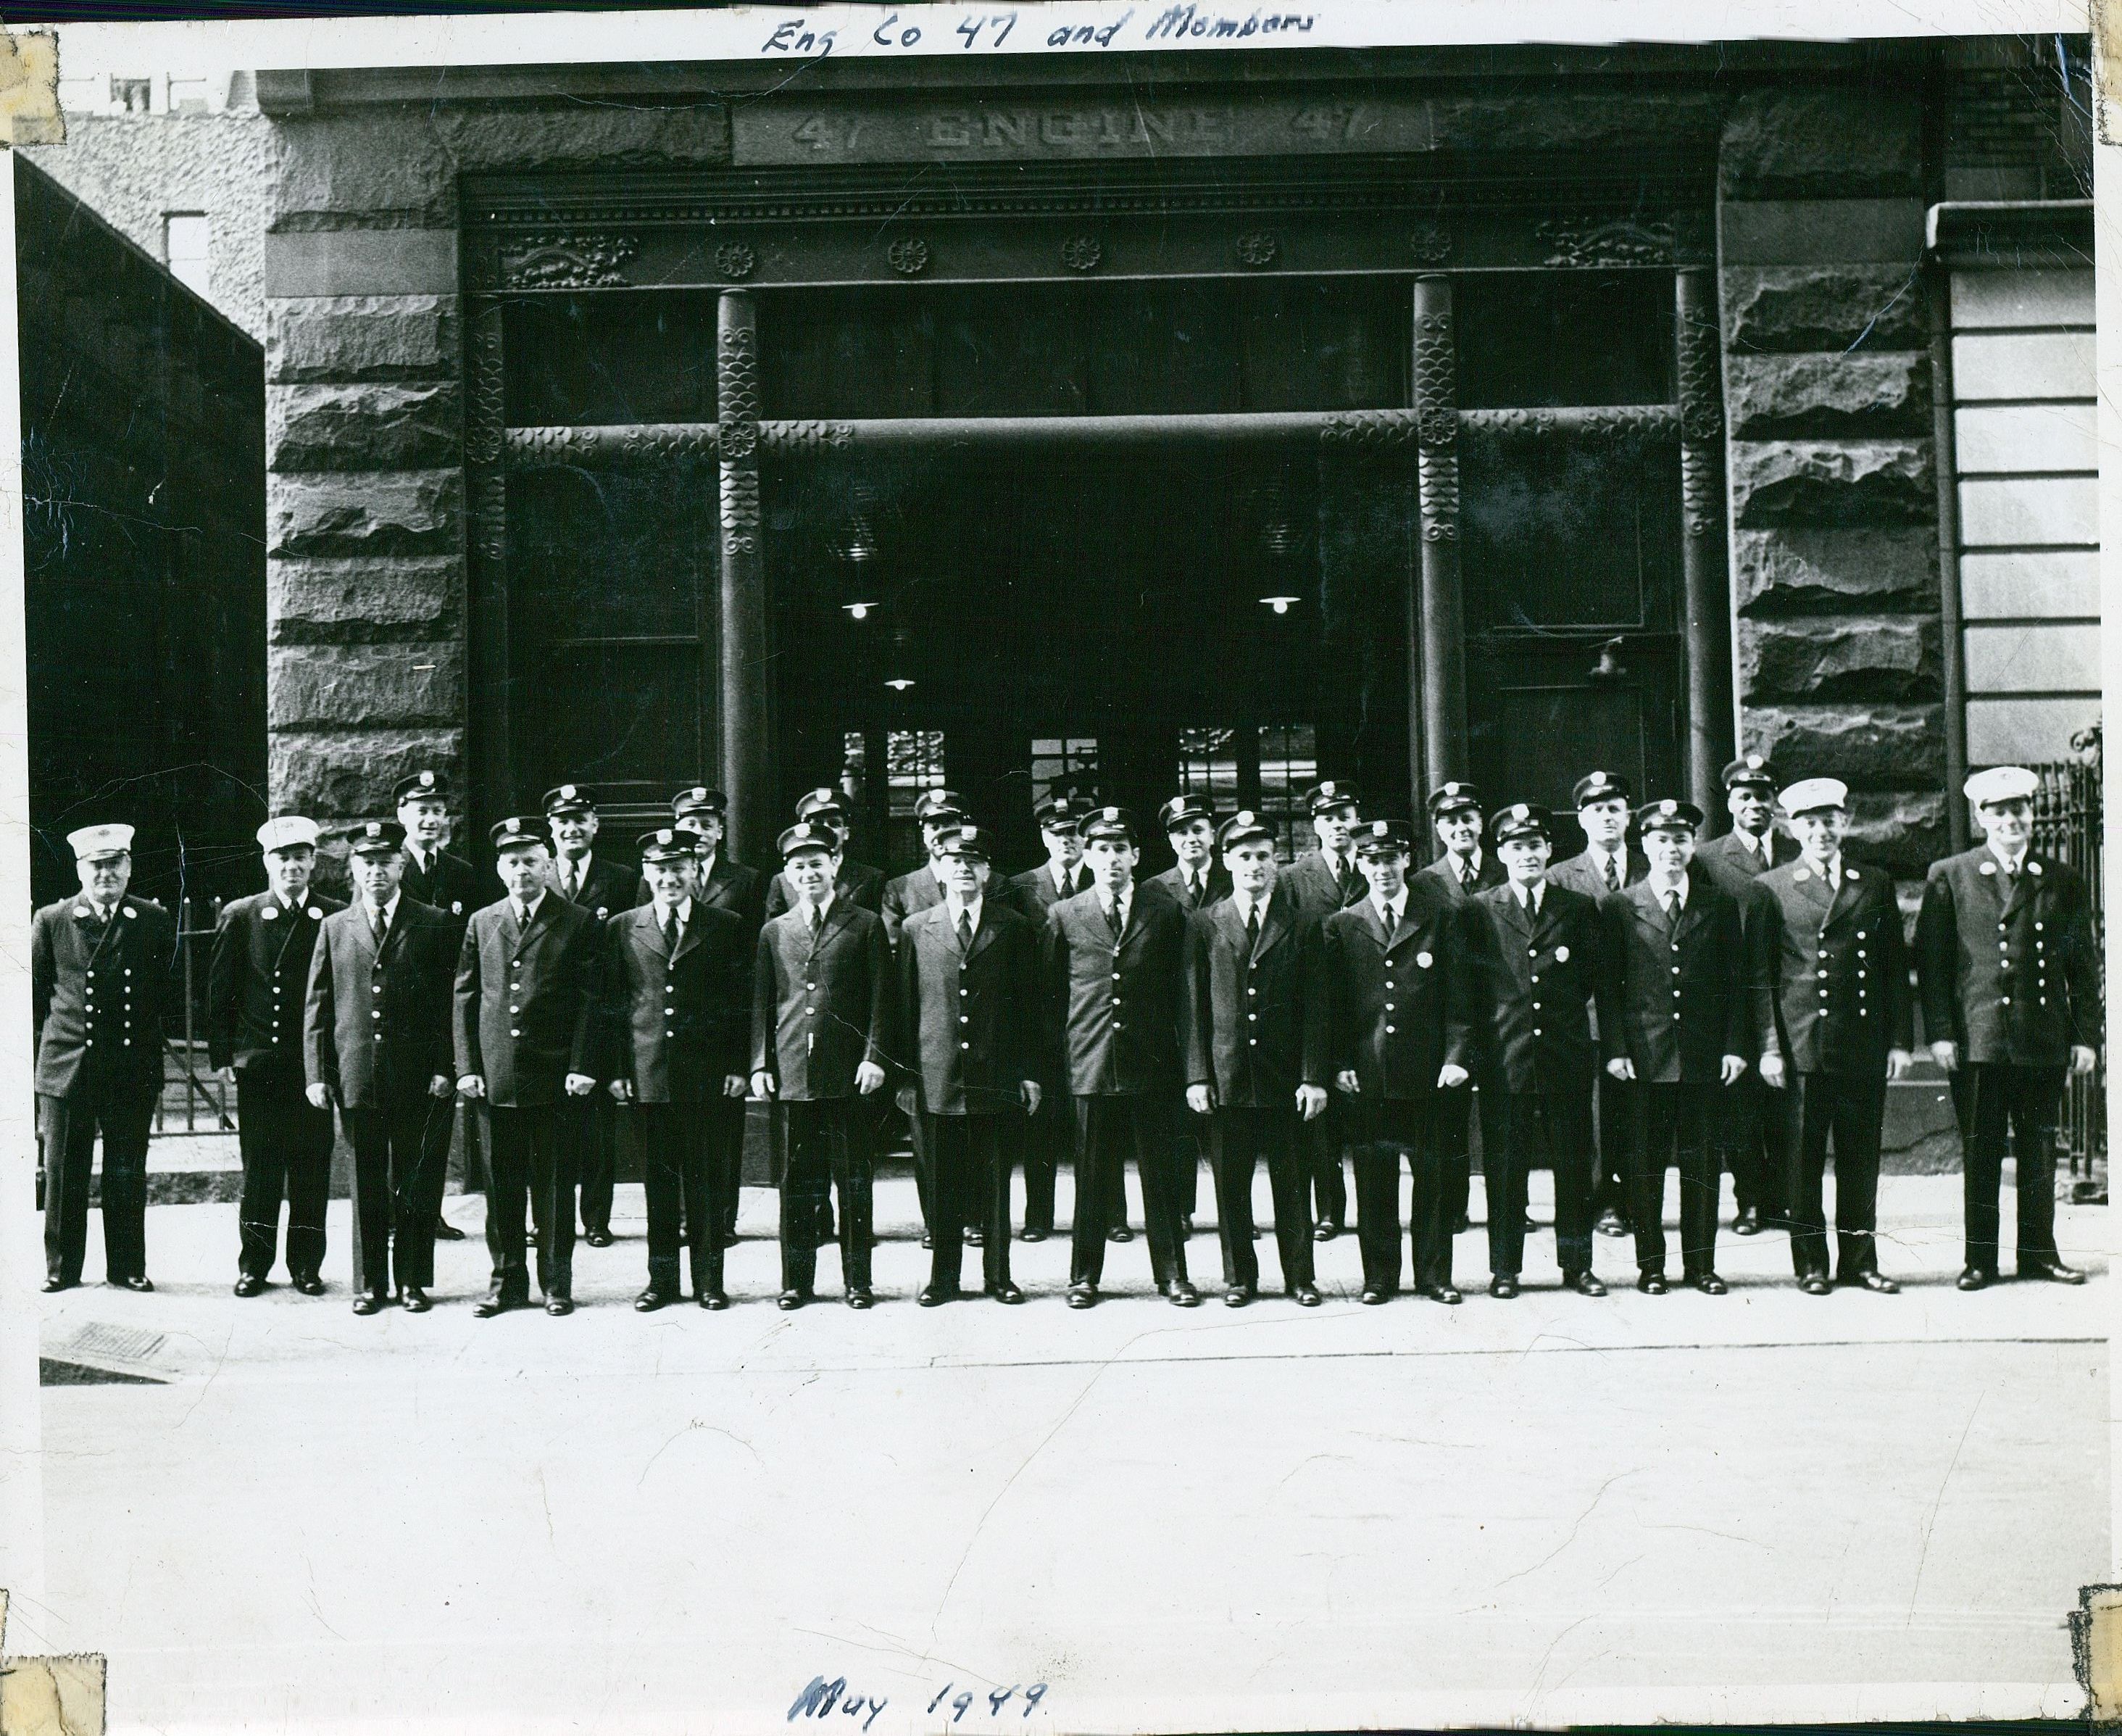 Umi’s father, Aubrey J. Weeks (back row right), with Engine Company 47, May 1949.